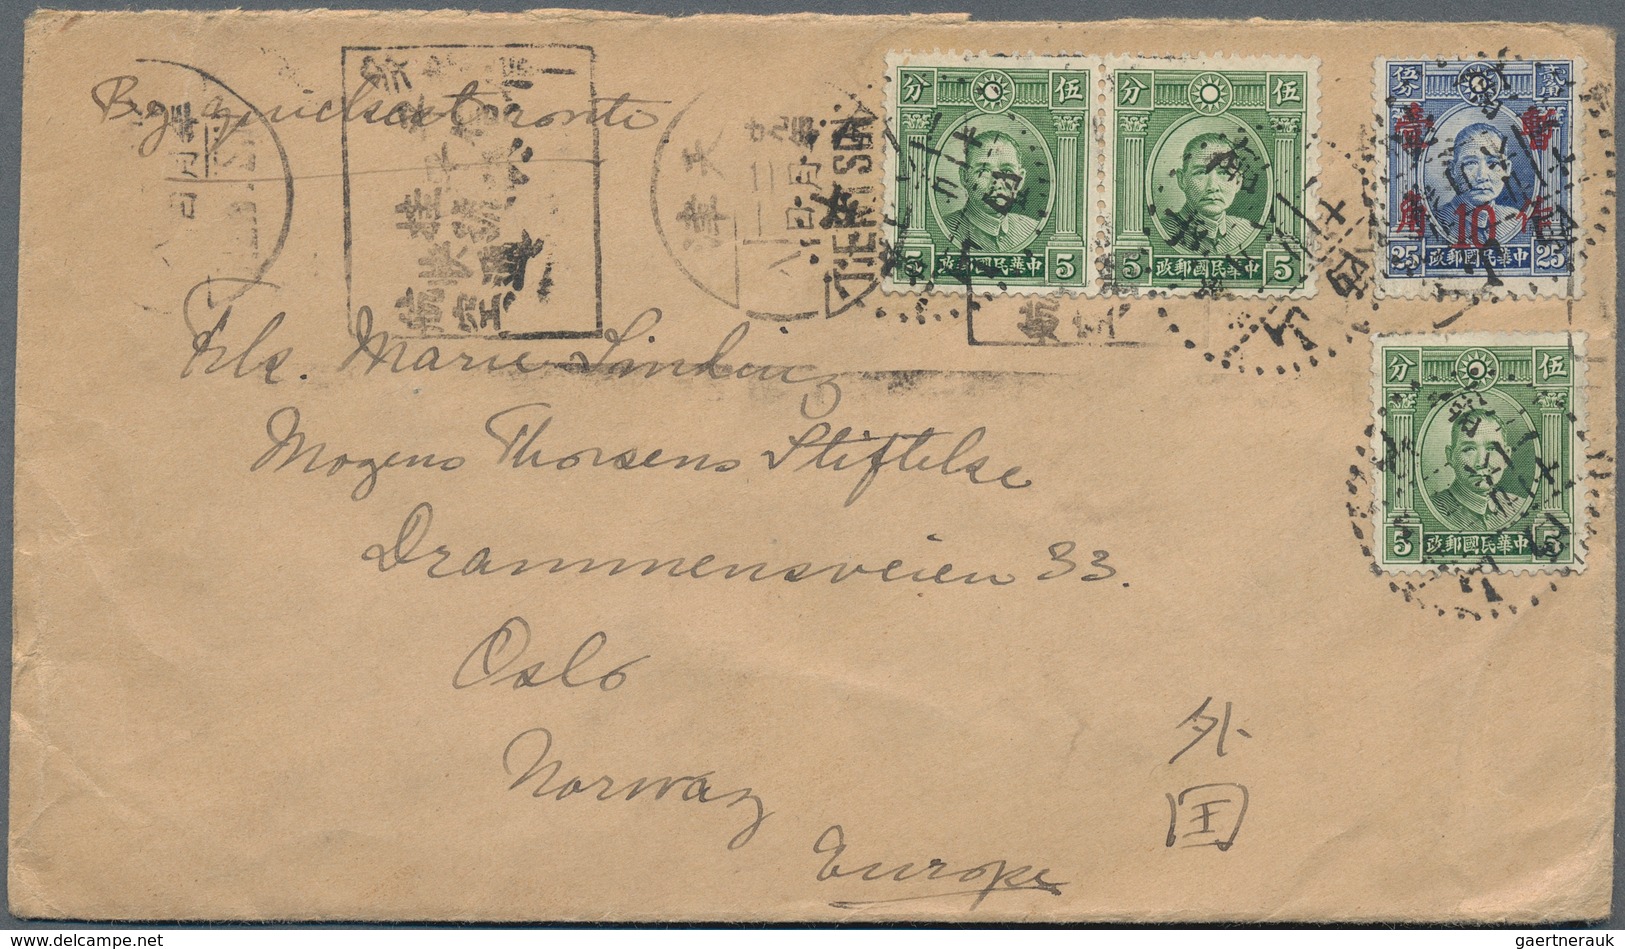 China: 1905/1953, ca. 180 covers and cards in 1 white box, mostly Republican commercial covers, but